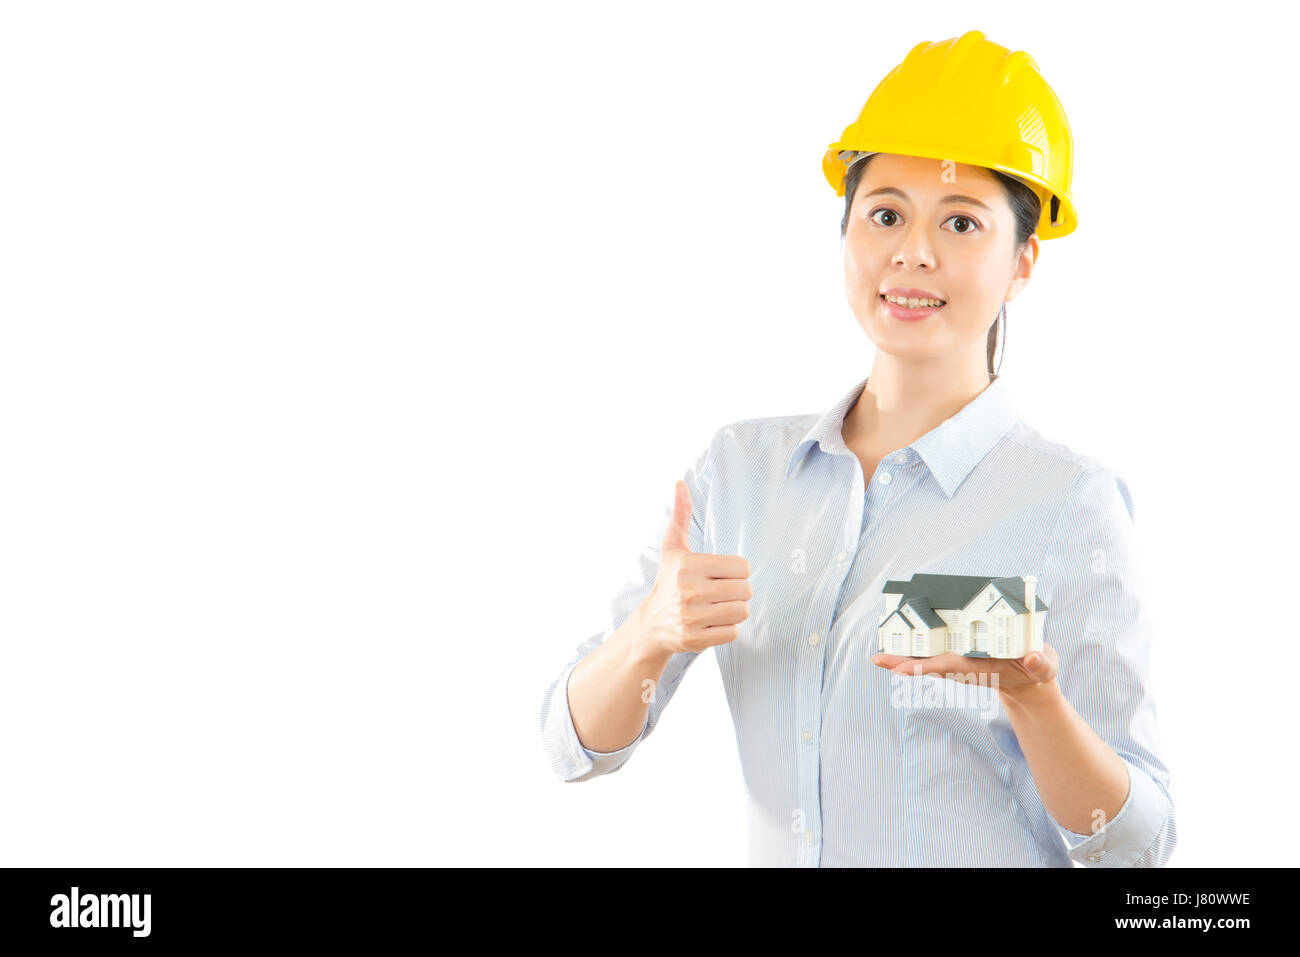 photo of thumbing up young lady architect with holding miniature house model and smiling standing on the blank white background over copyspace wall. C Stock Photo